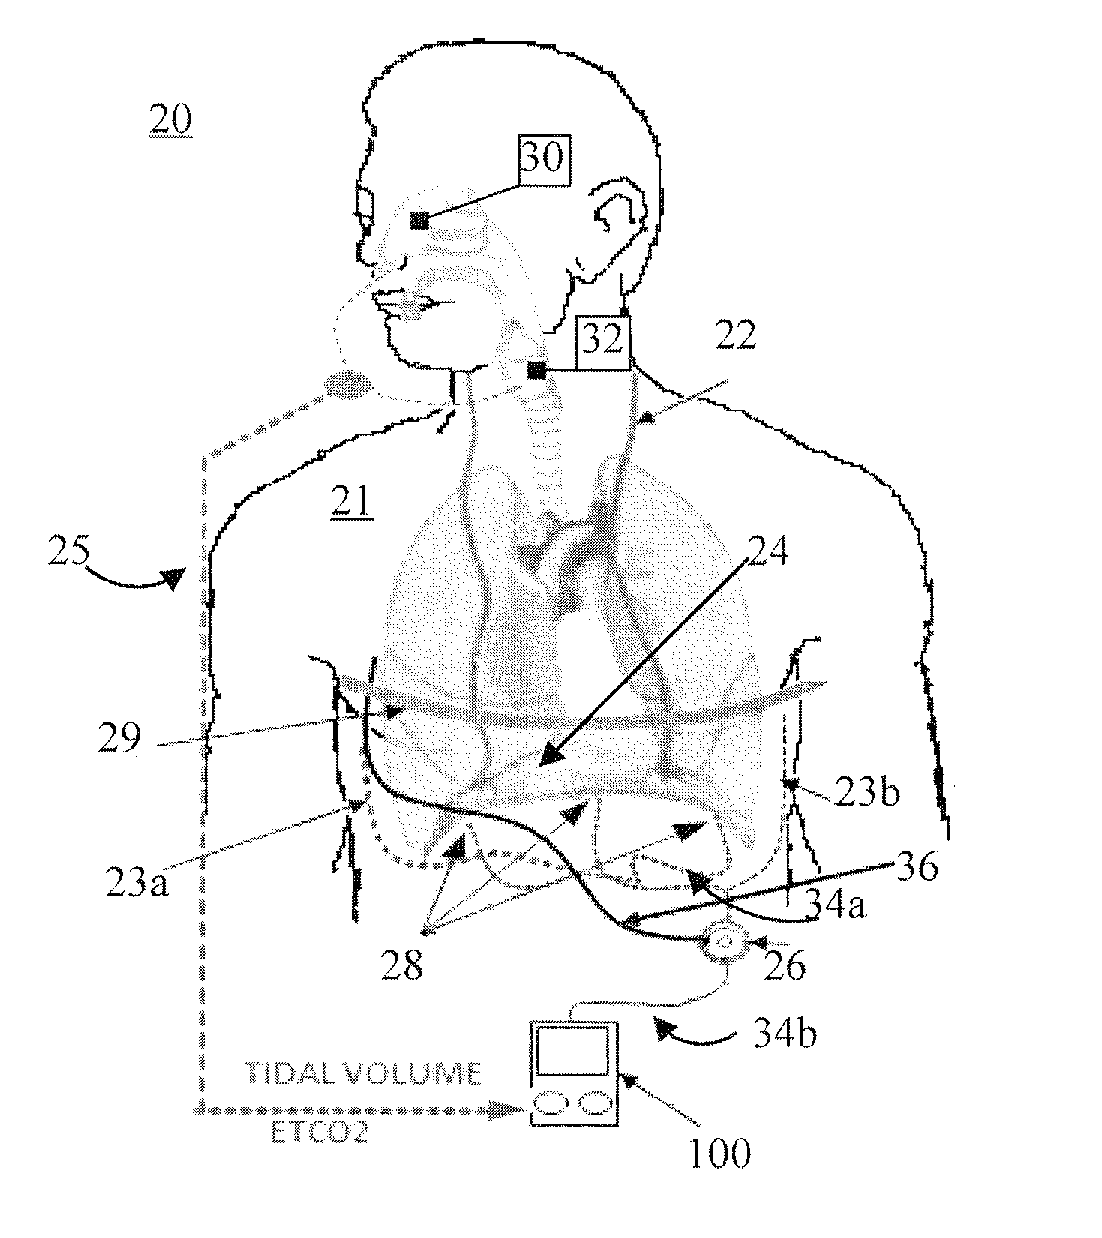 System and method for neuromorphic controlled adaptive pacing of respiratory muscles and nerves